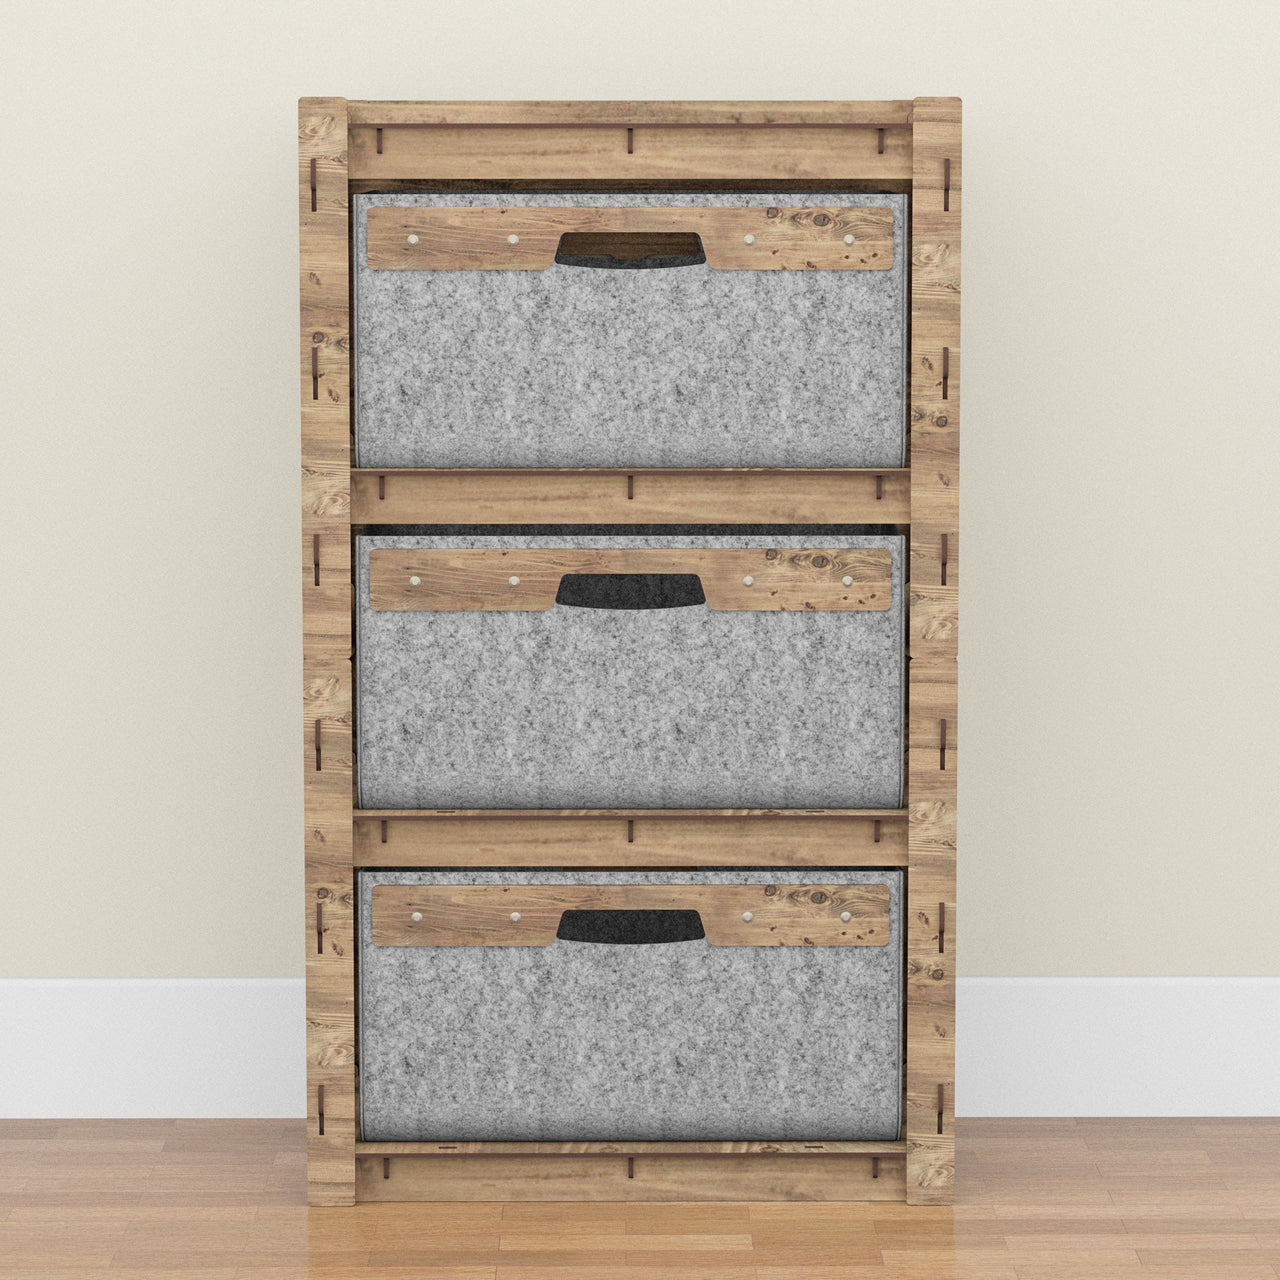 Brickwall Chest Of 3 Drawers Storage Cabinet [3 LARGE GRAY BINS]